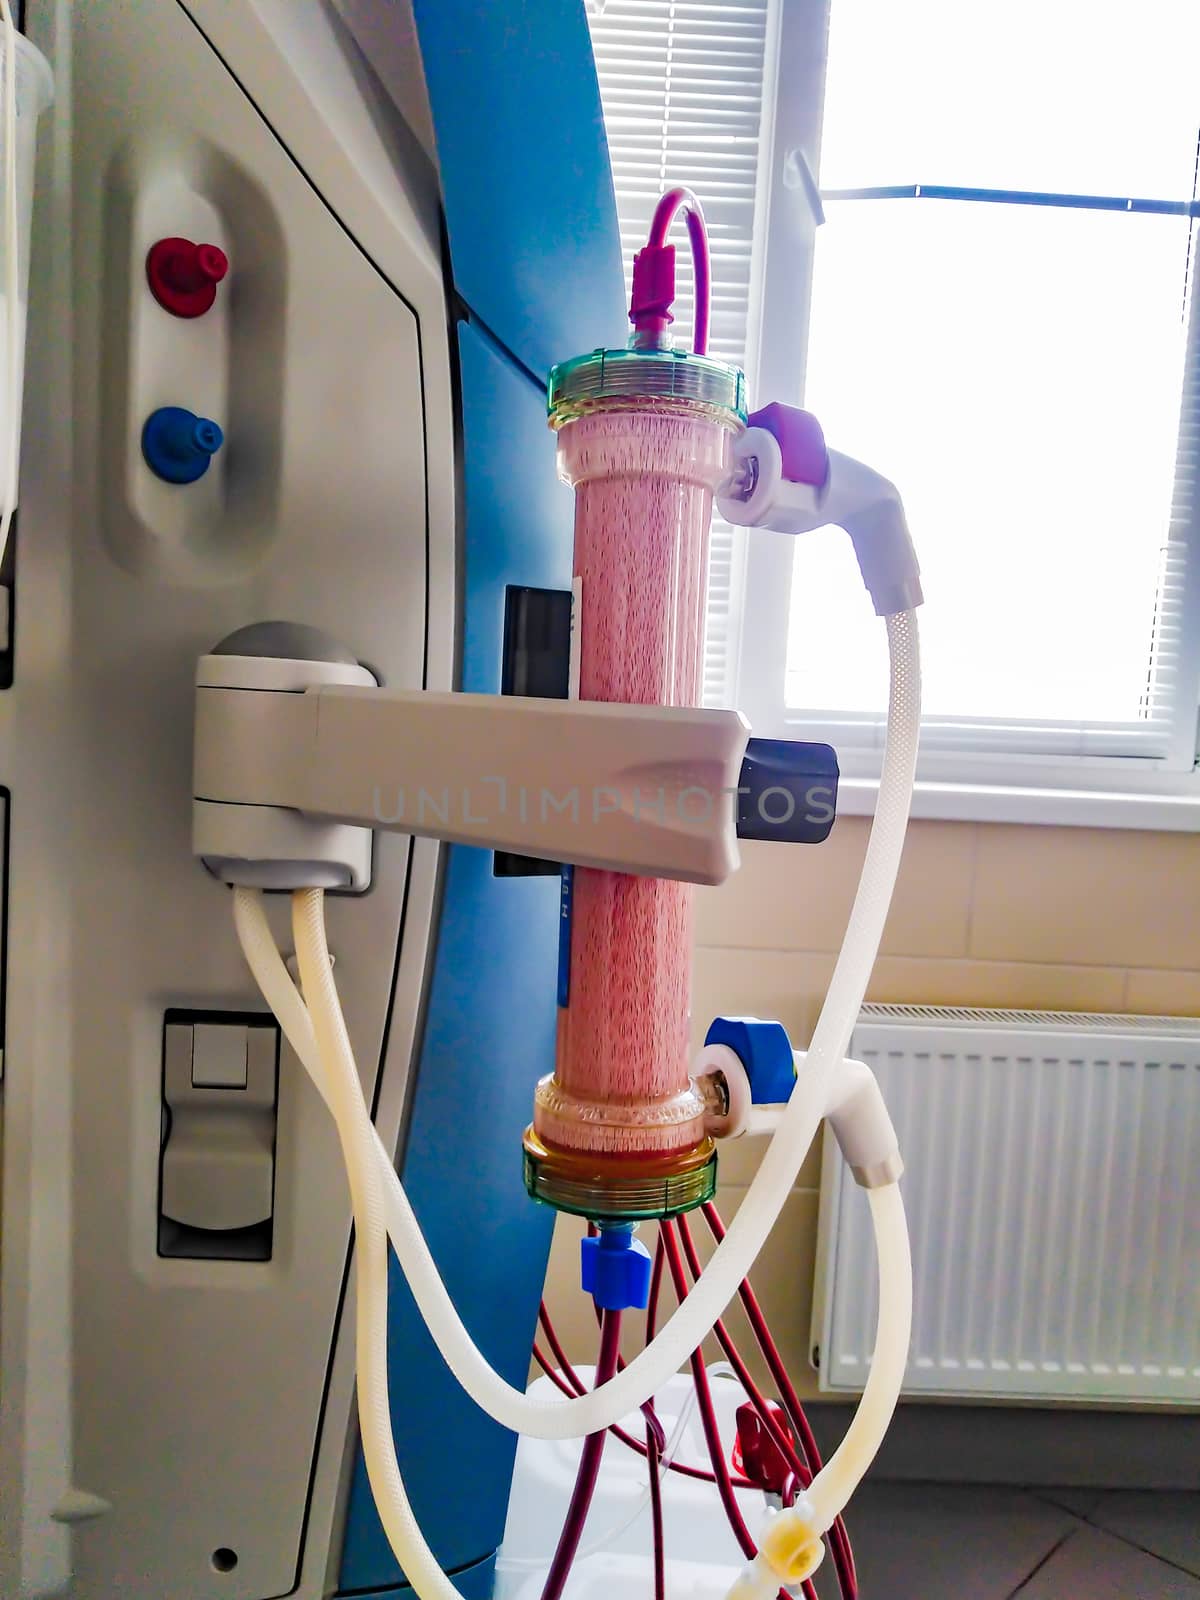 software hemodialysis machine with Blood filter for cleaning